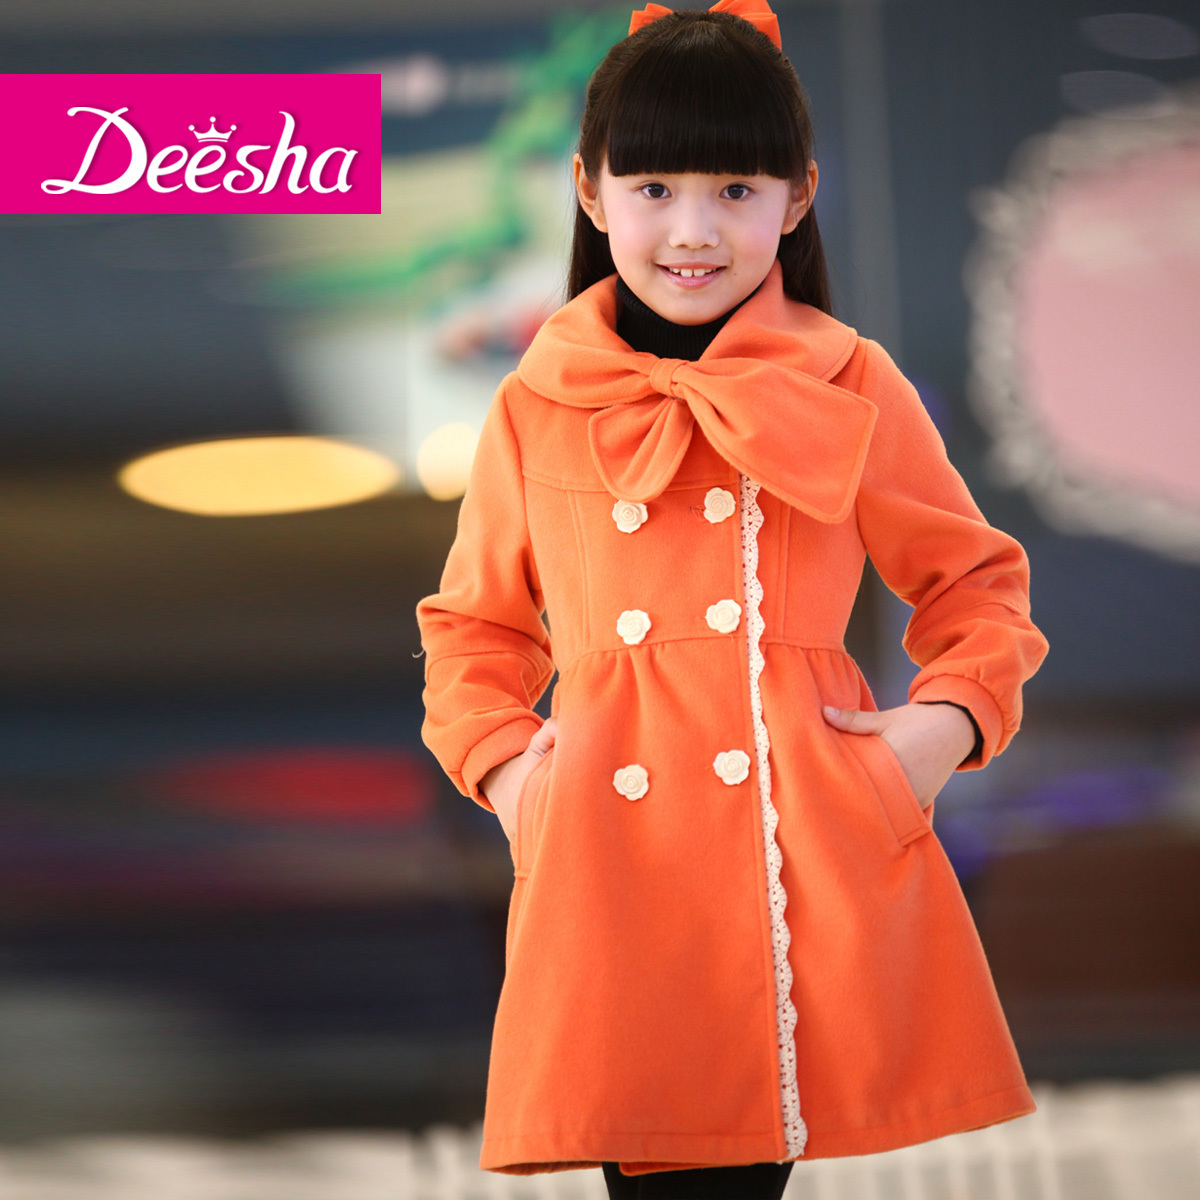 DEESHA 2012 autumn and winter new arrival girls clothing child long design thickening child trench overcoat 1219216